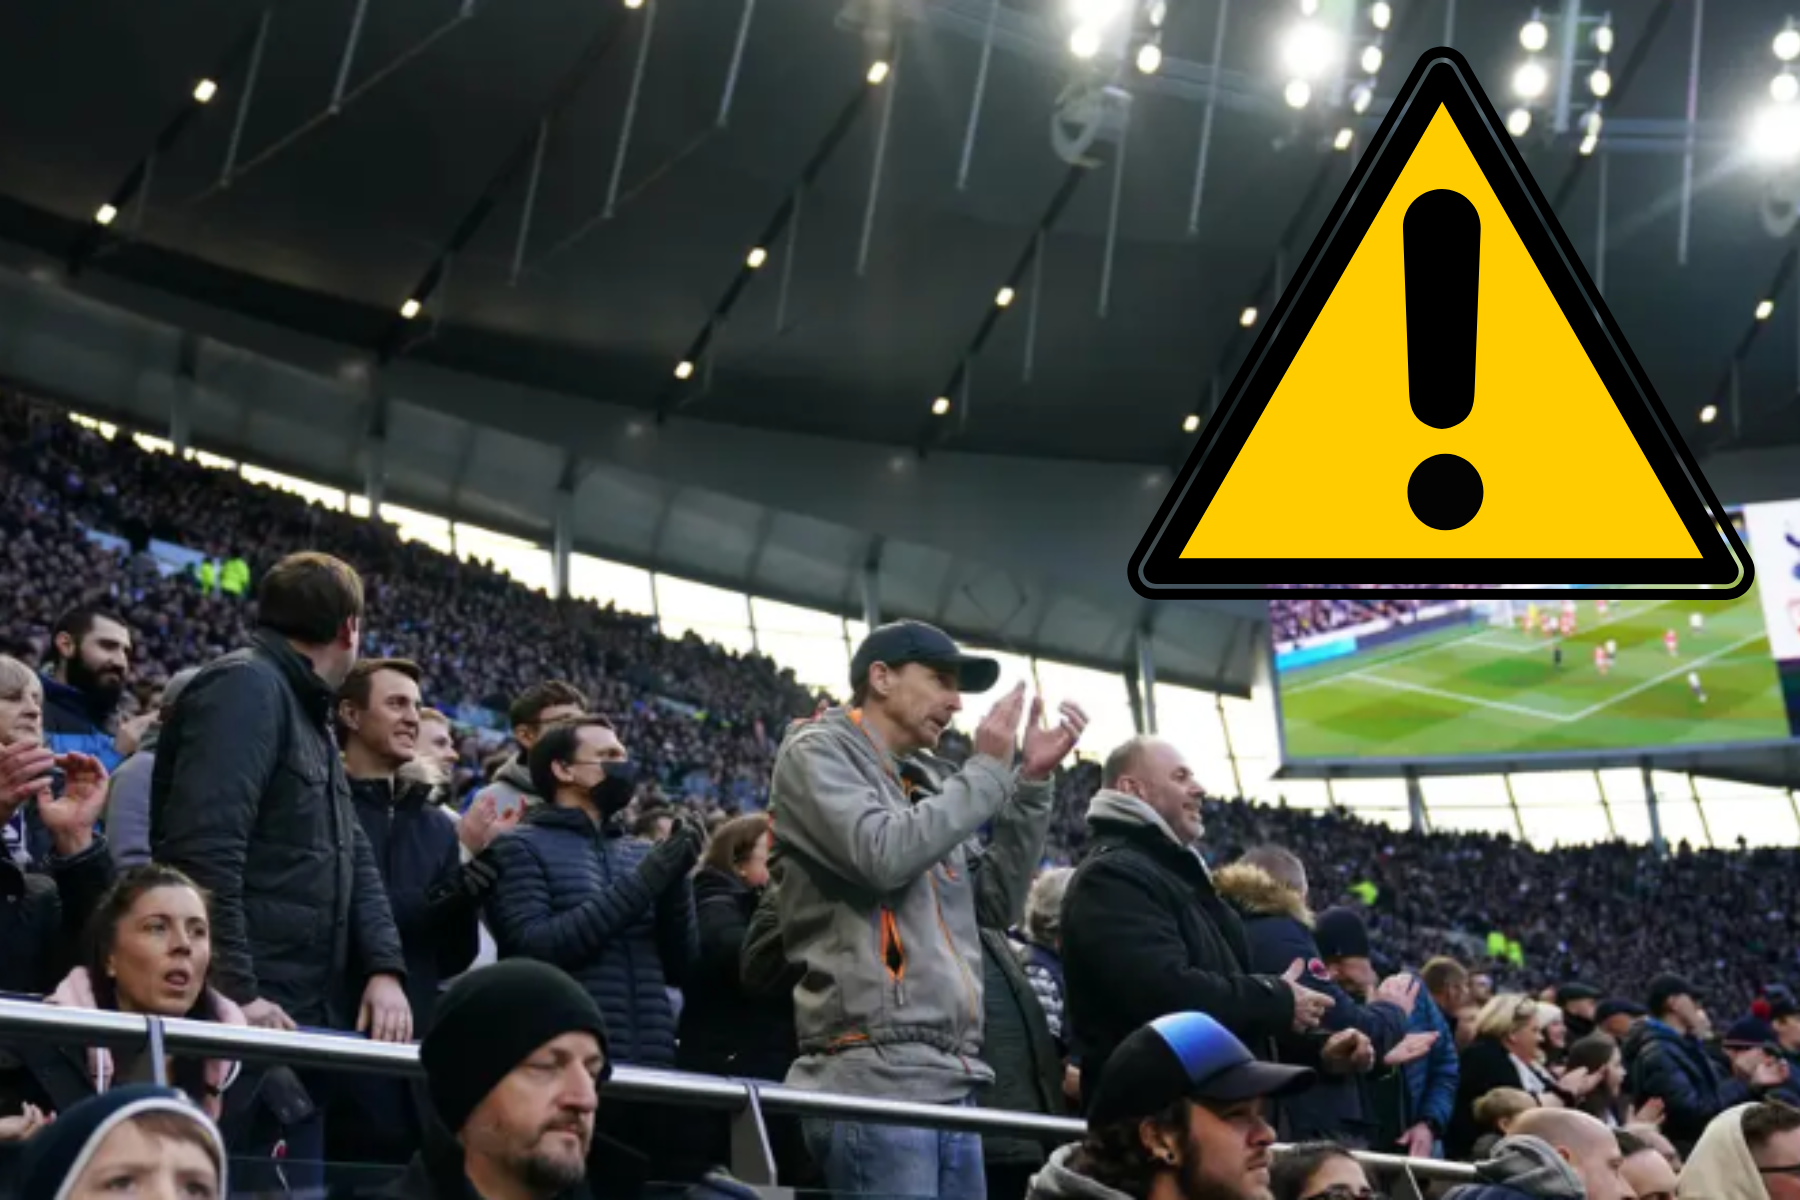 Lloyds bank issues urgent scam warning to Premier League, EFL and SPL fans